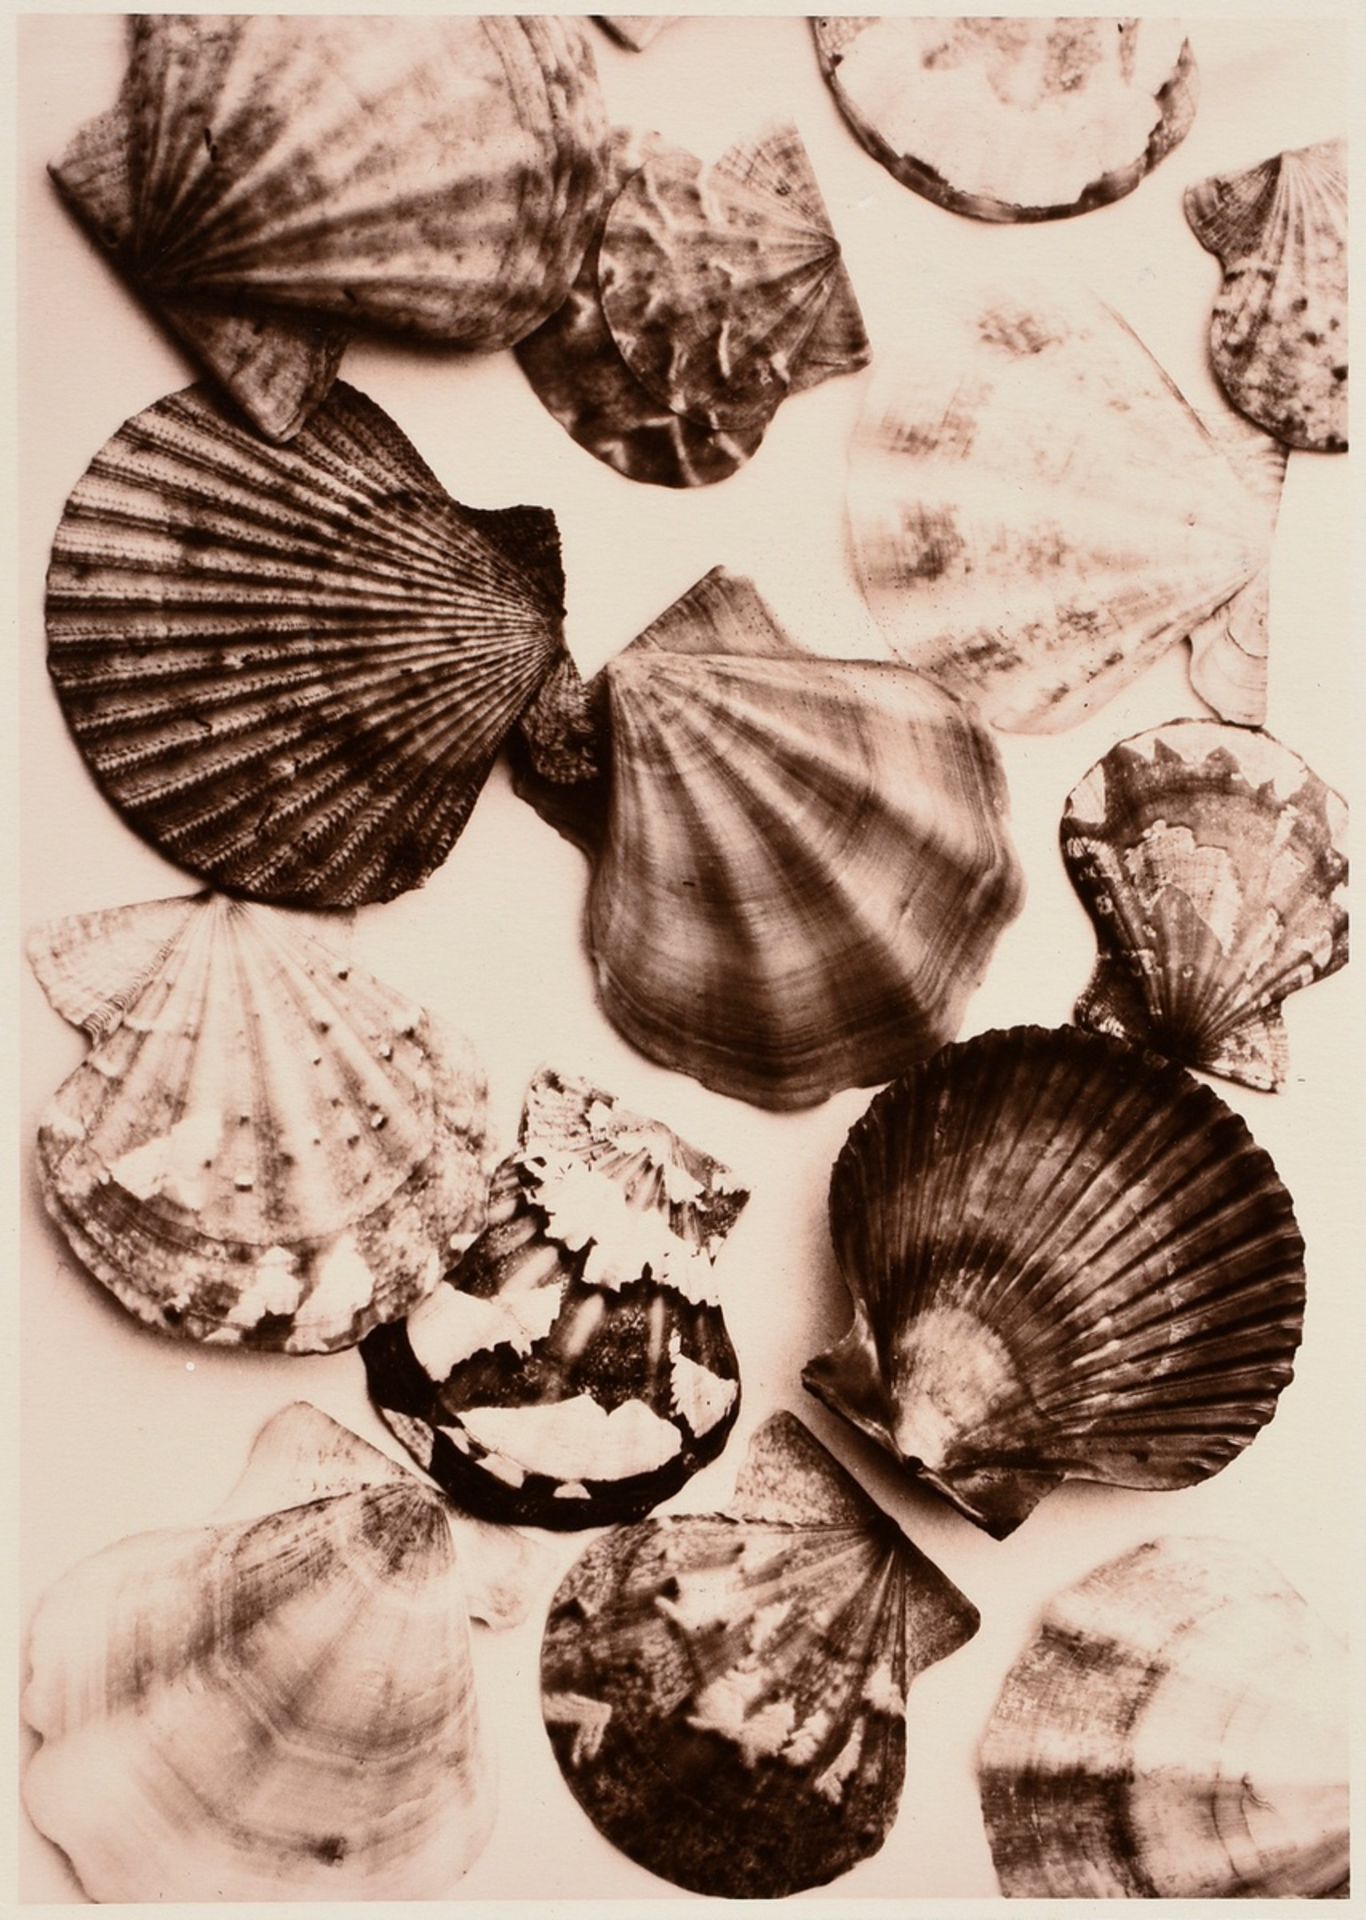 6 Koch, Fred (1904-1947) "Ice Crystals, Mushrooms, Animals", photographs mounted on cardboard, insc - Image 19 of 20